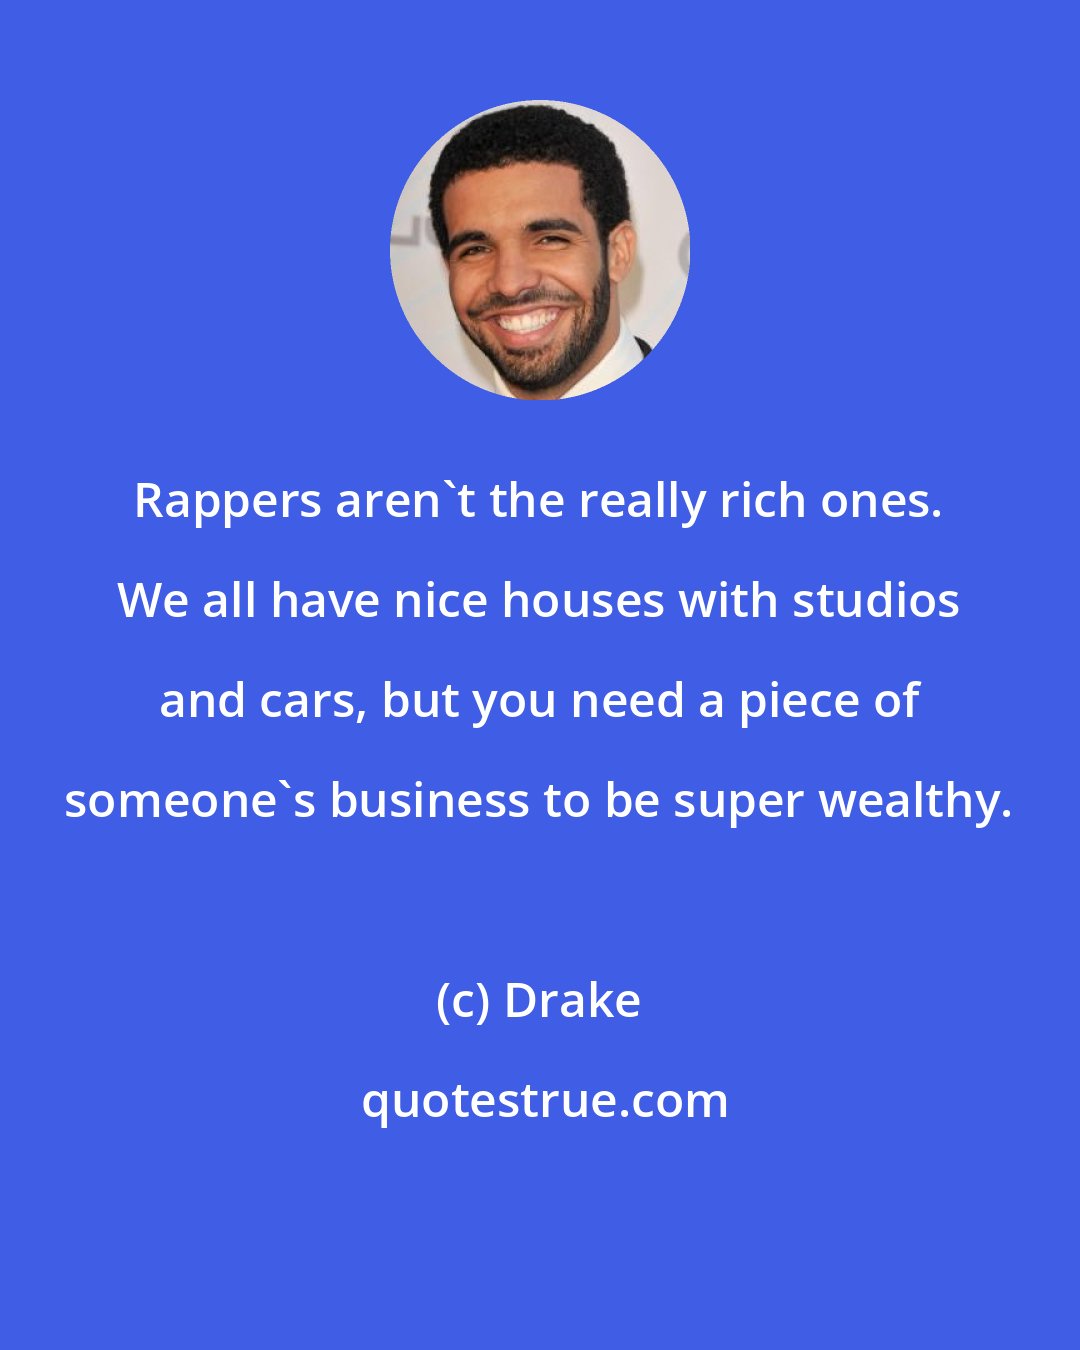 Drake: Rappers aren't the really rich ones. We all have nice houses with studios and cars, but you need a piece of someone's business to be super wealthy.